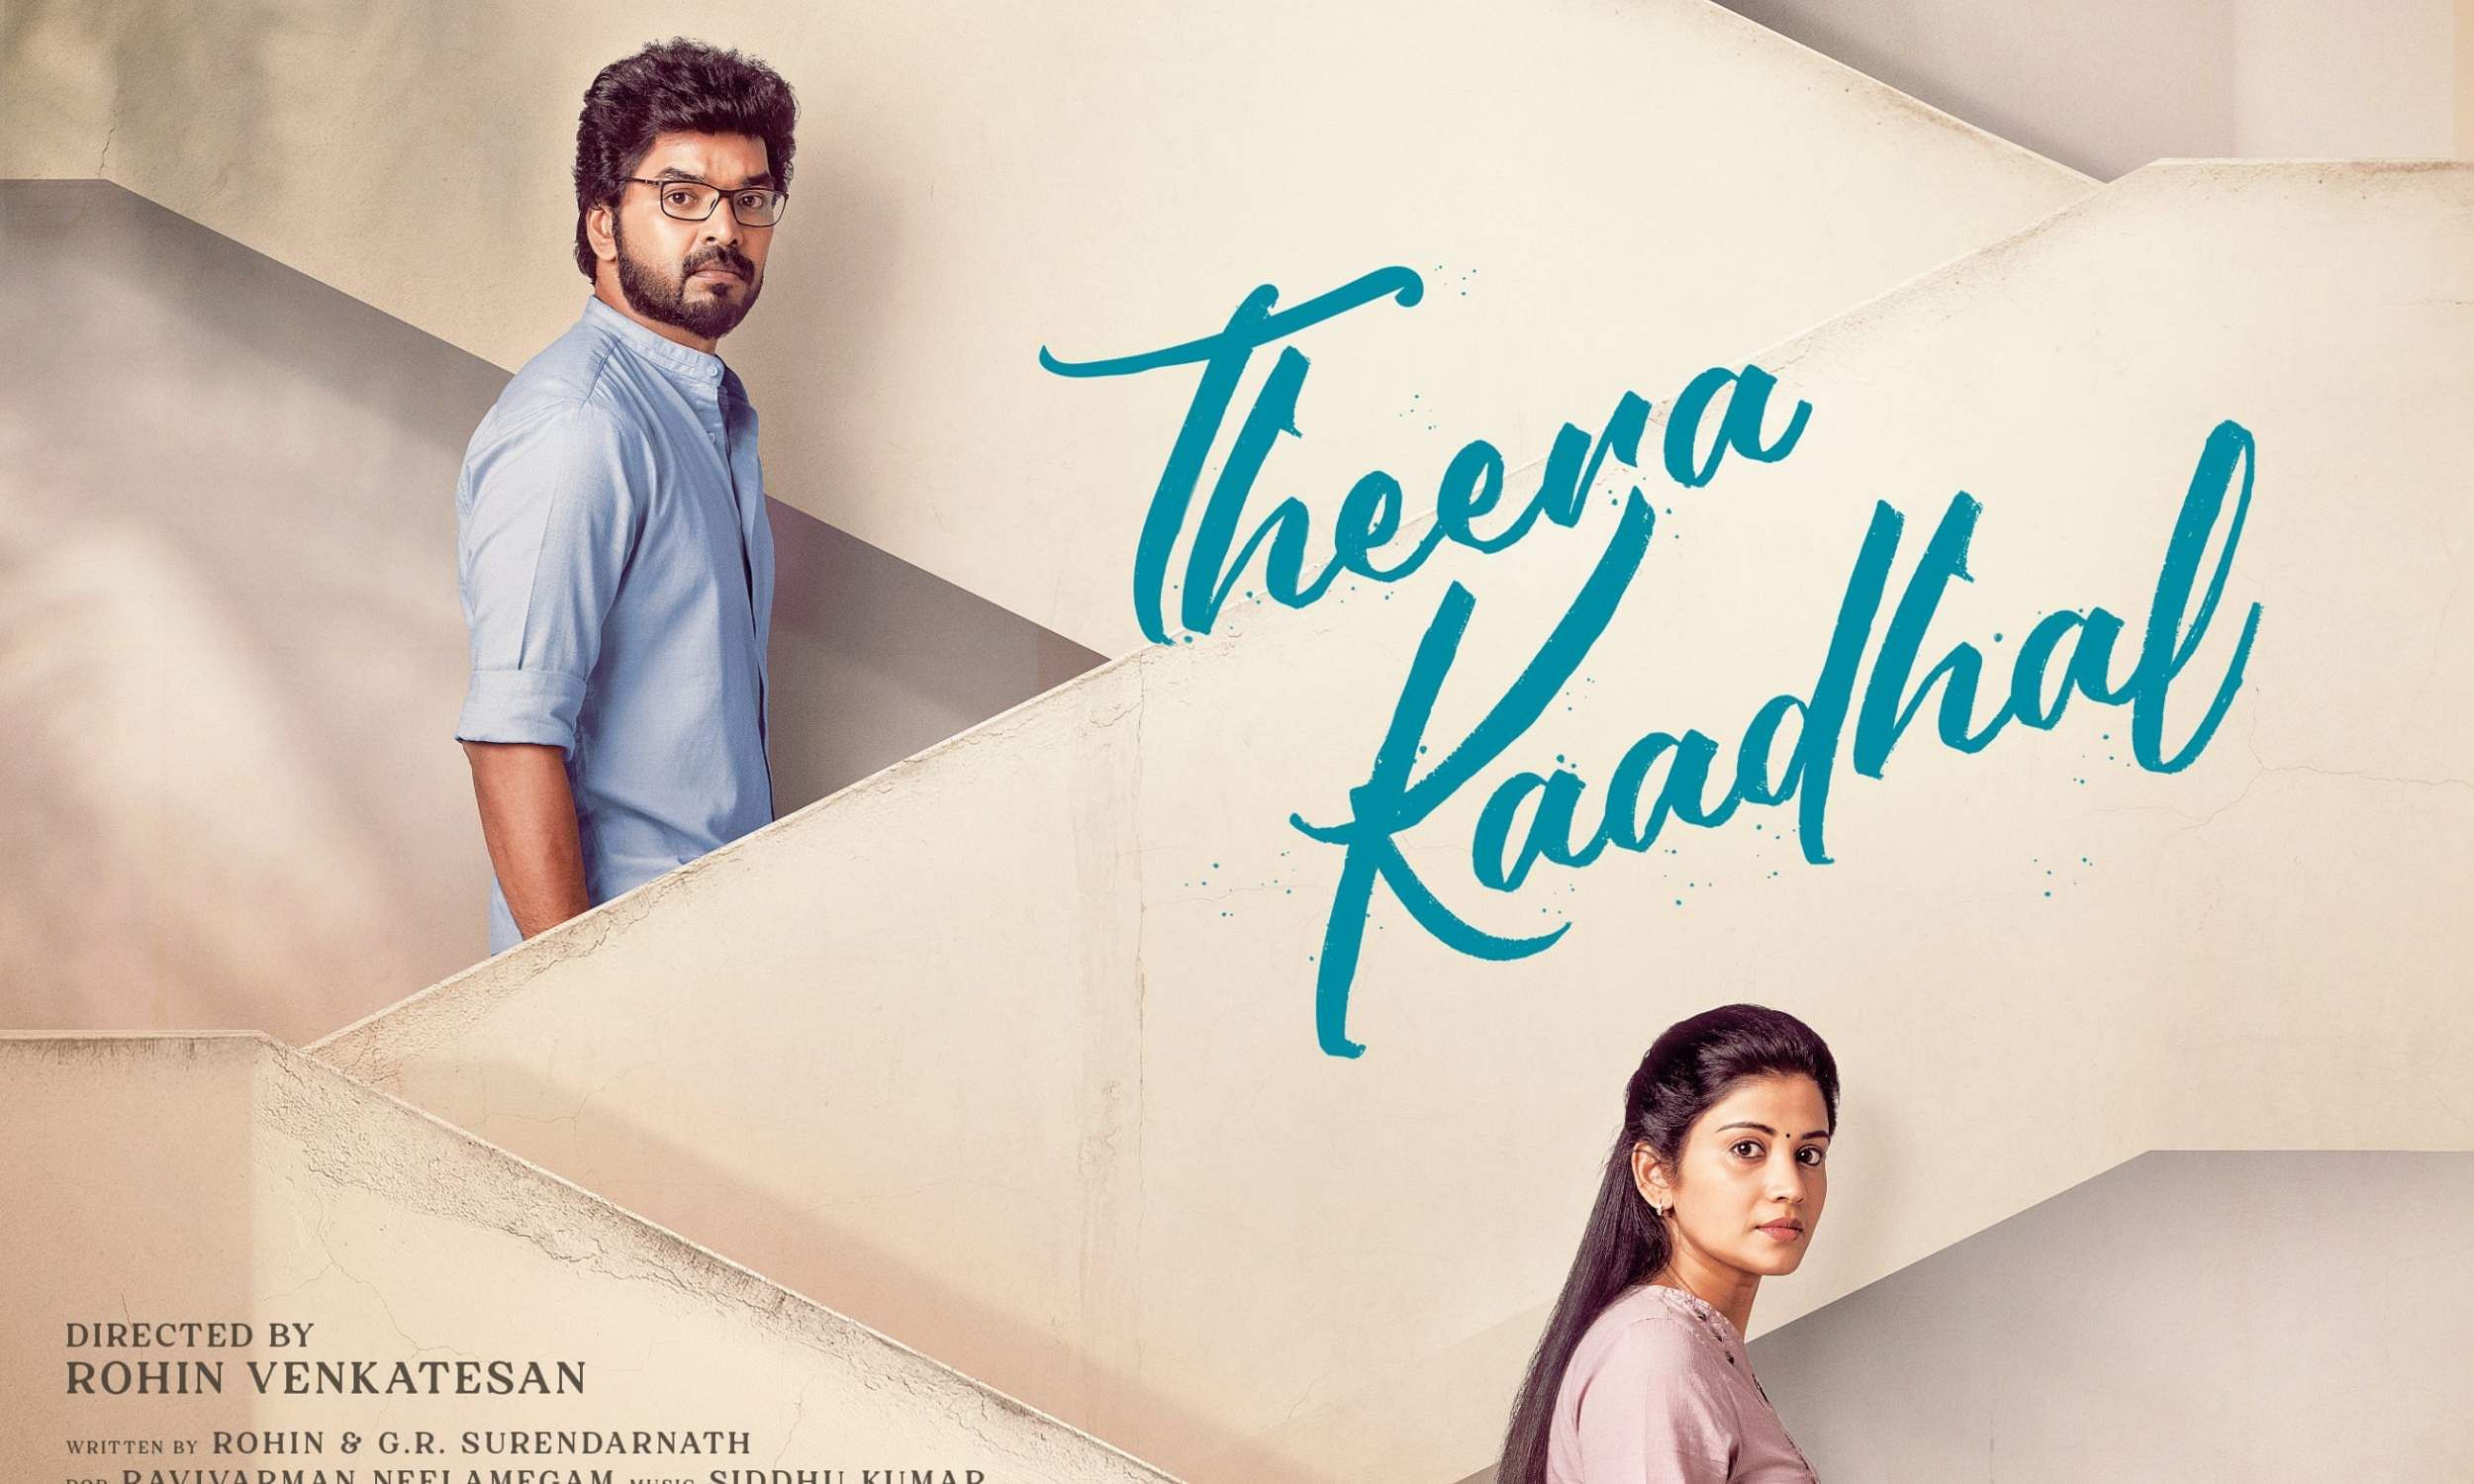 First single from Theera Kaadhal will be out tomorrow